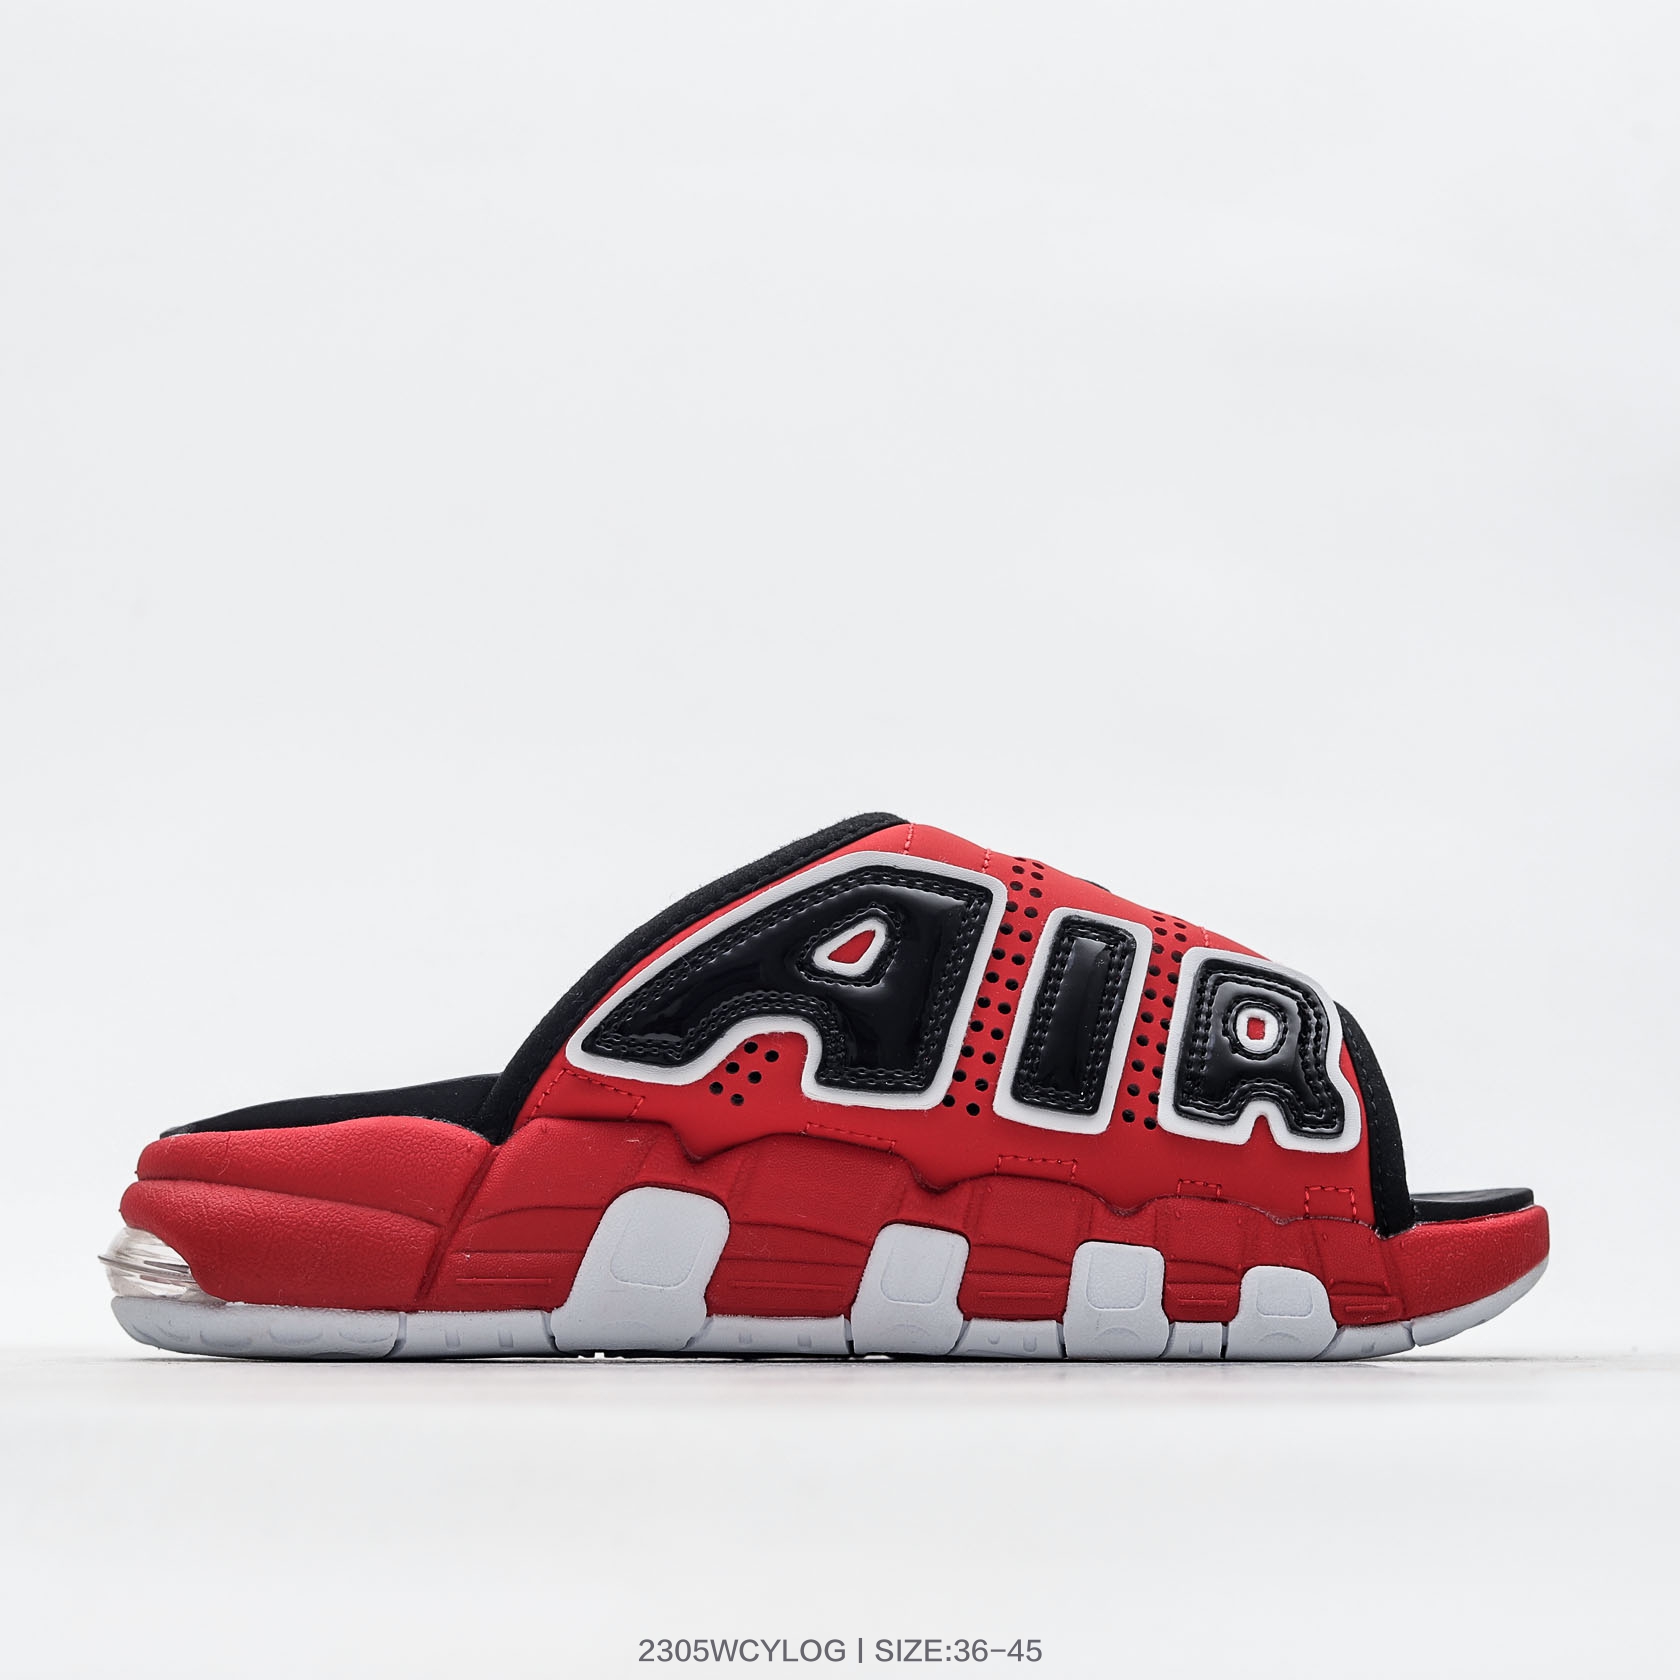 Nike Air More Uptempo Slides Unisex # 270041, cheap Nike Slippers, only $54!